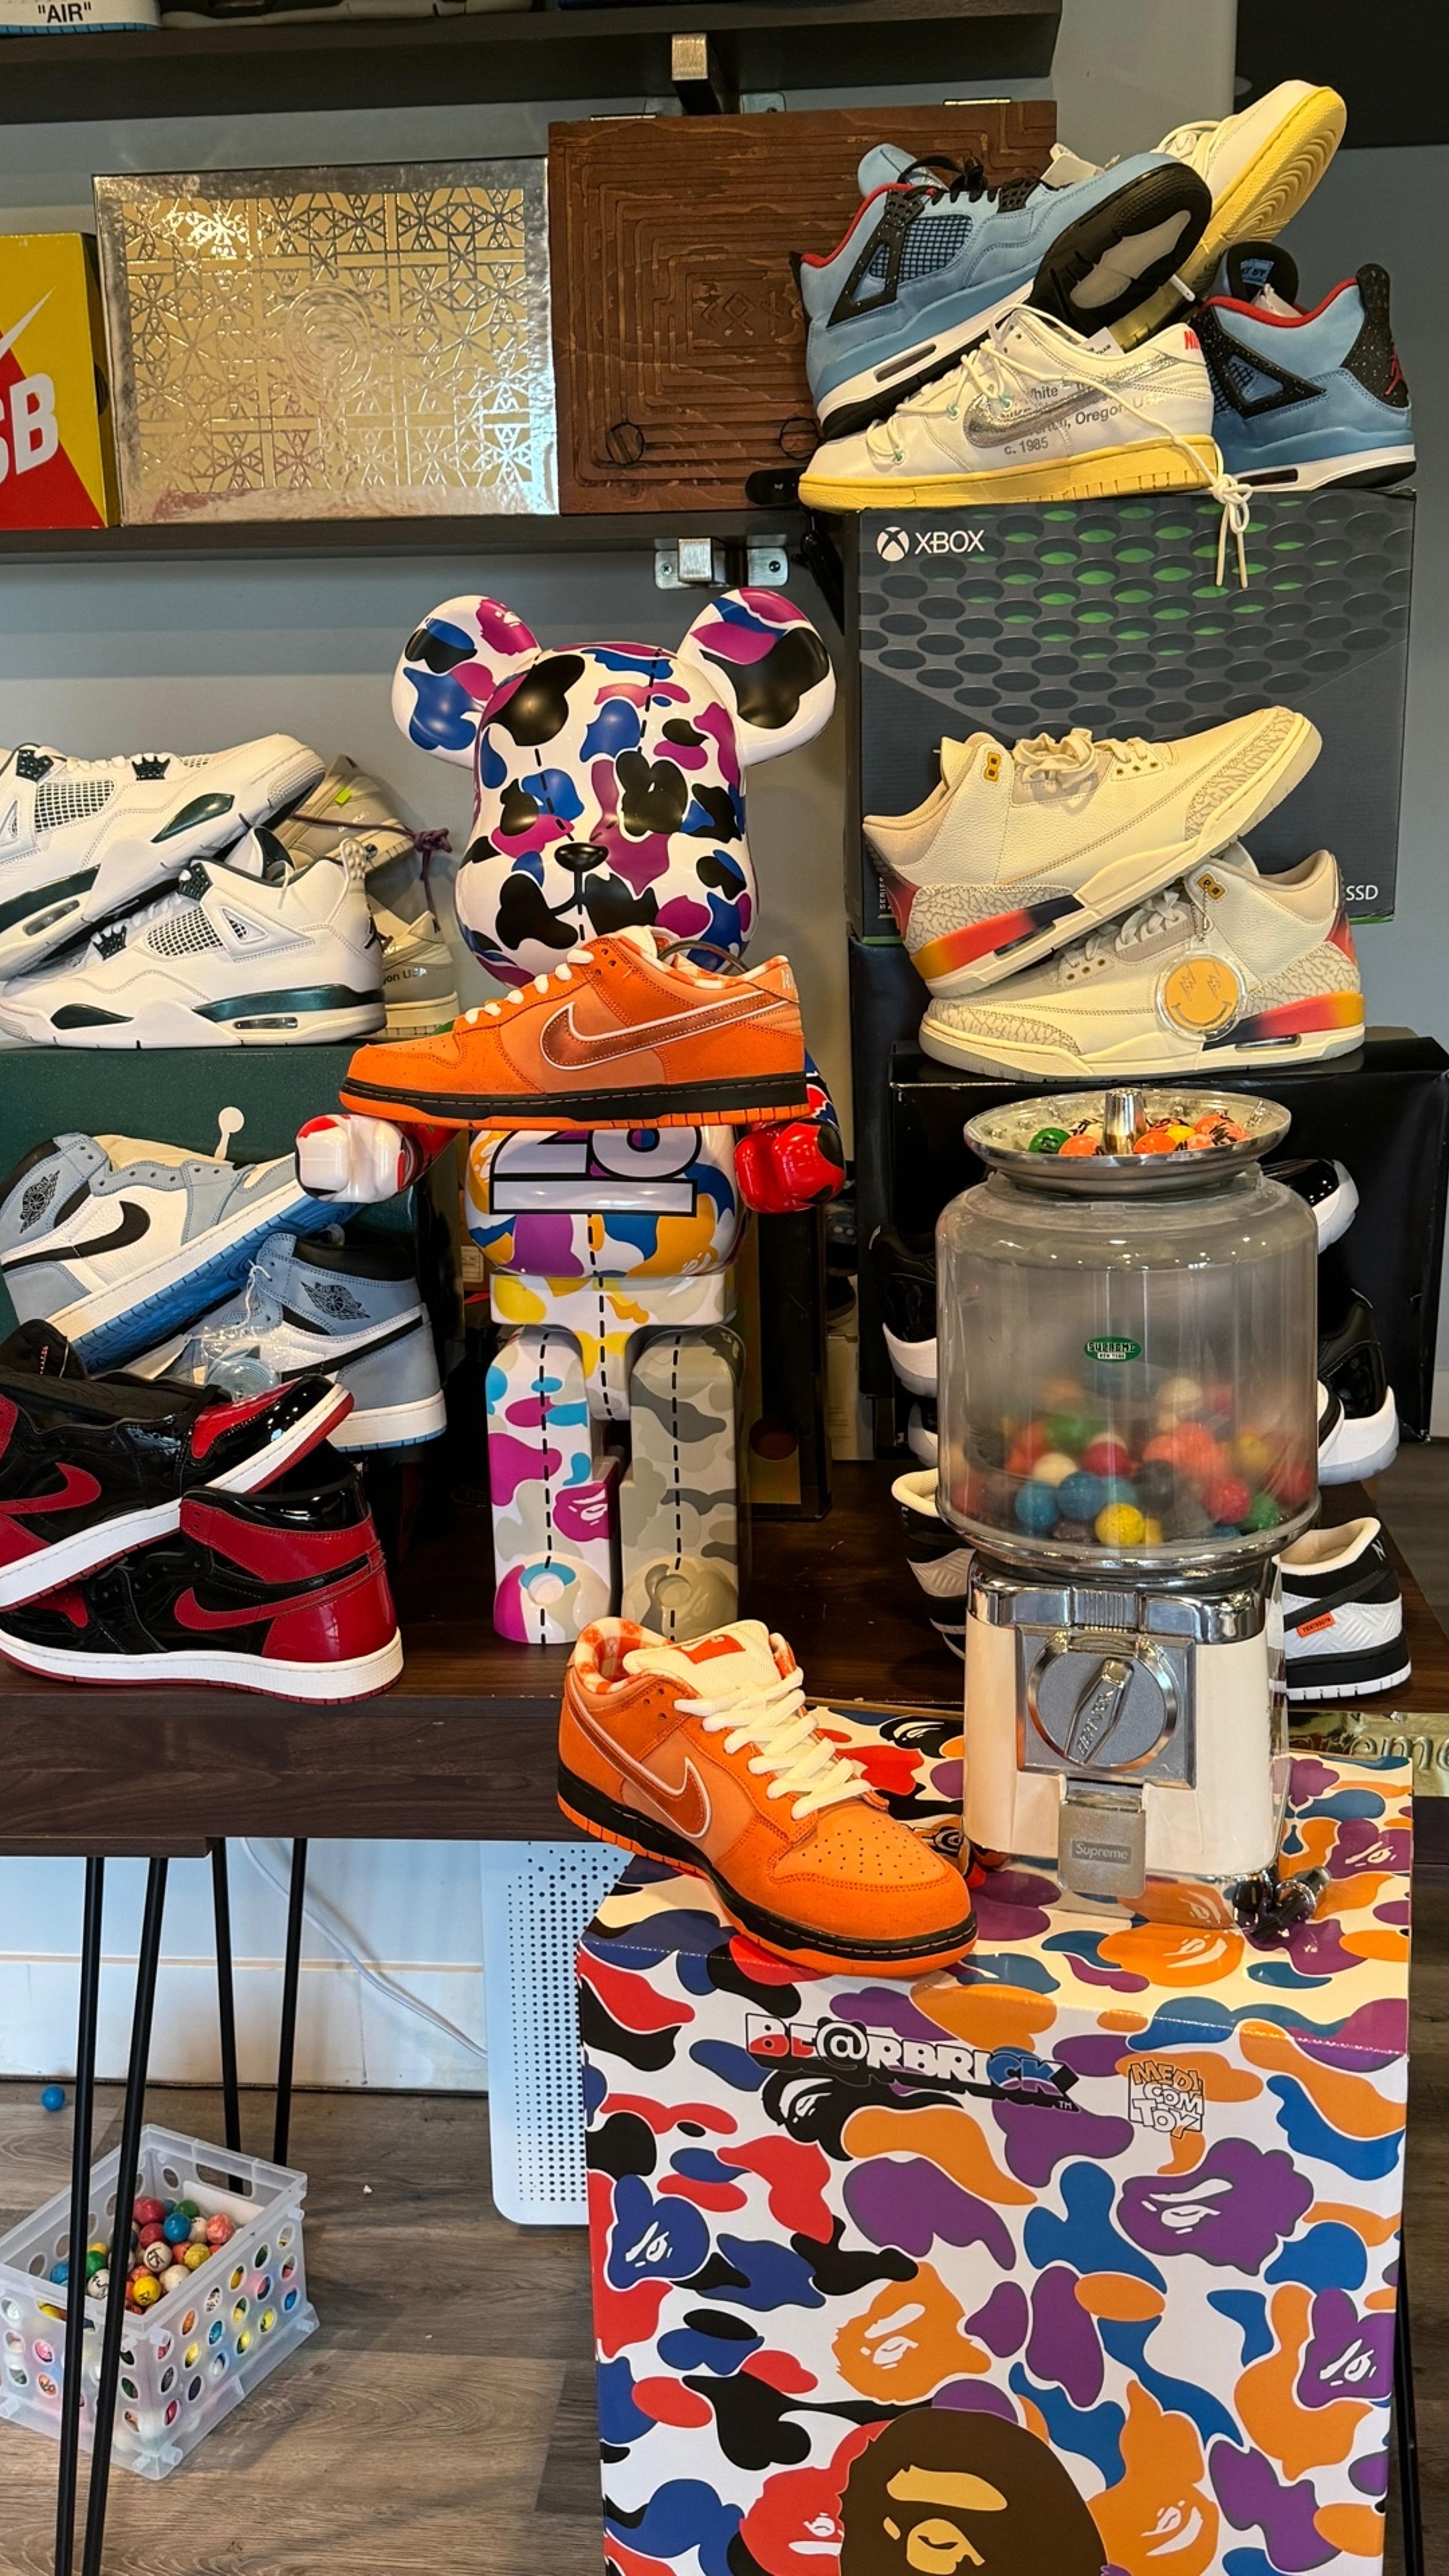 Preview image for the show titled "FUTURA SB YOU PICK YOUR SIZE!! 7k STREAM " at Today @ 11:30 PM